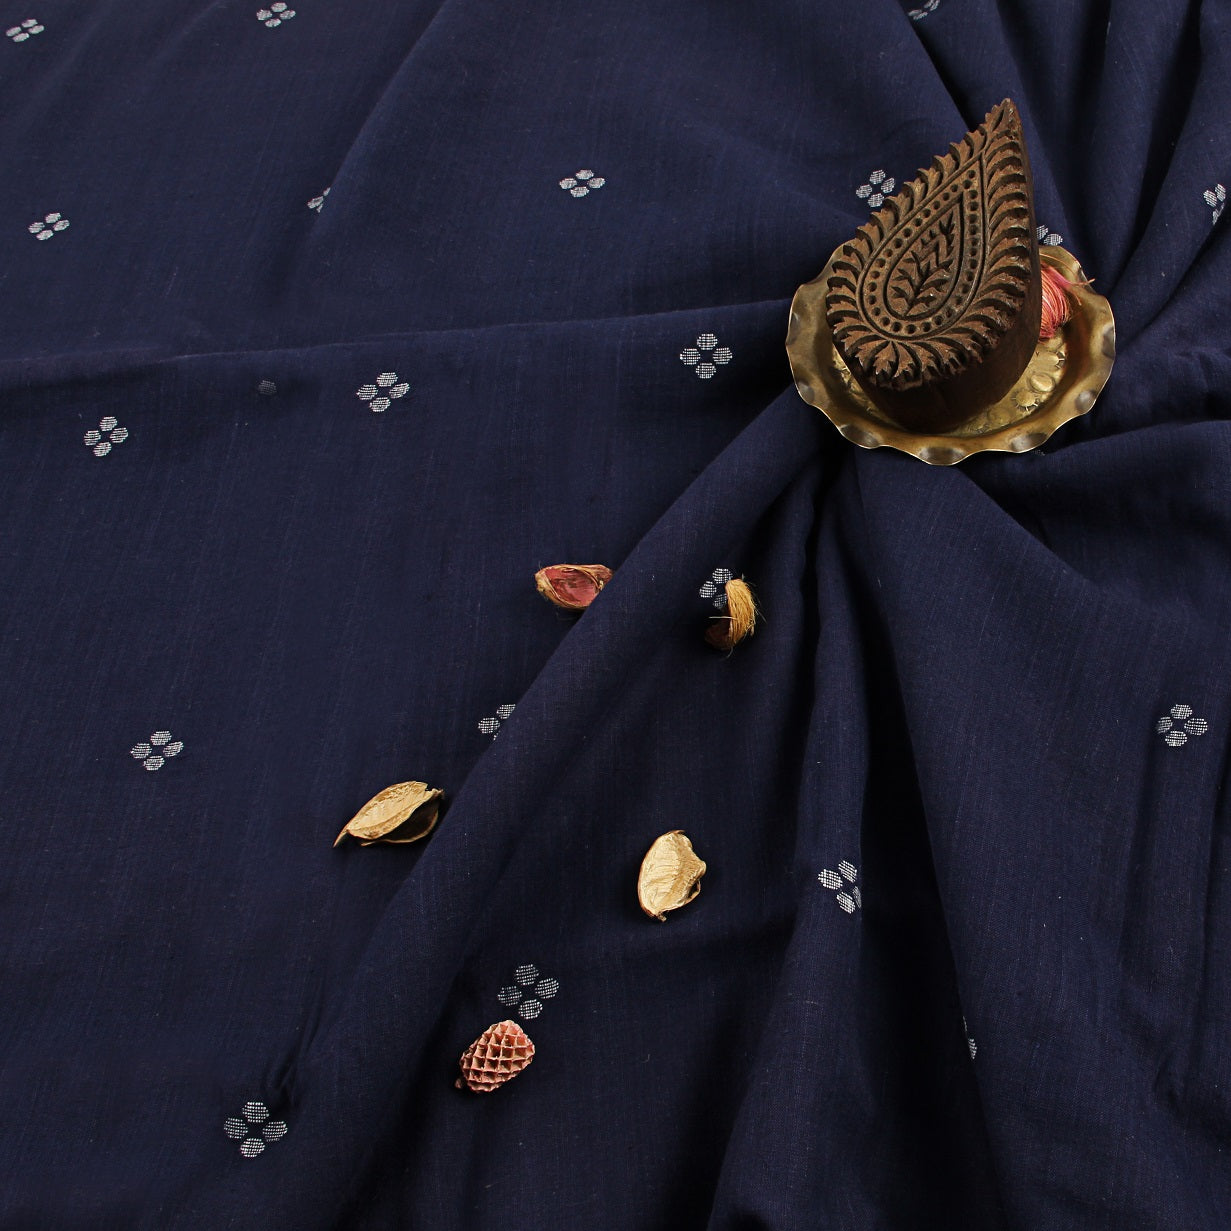 Hand Woven Fabric - Buy Hand Woven Fabric Online @ Rs. 445/Mtr | The ...